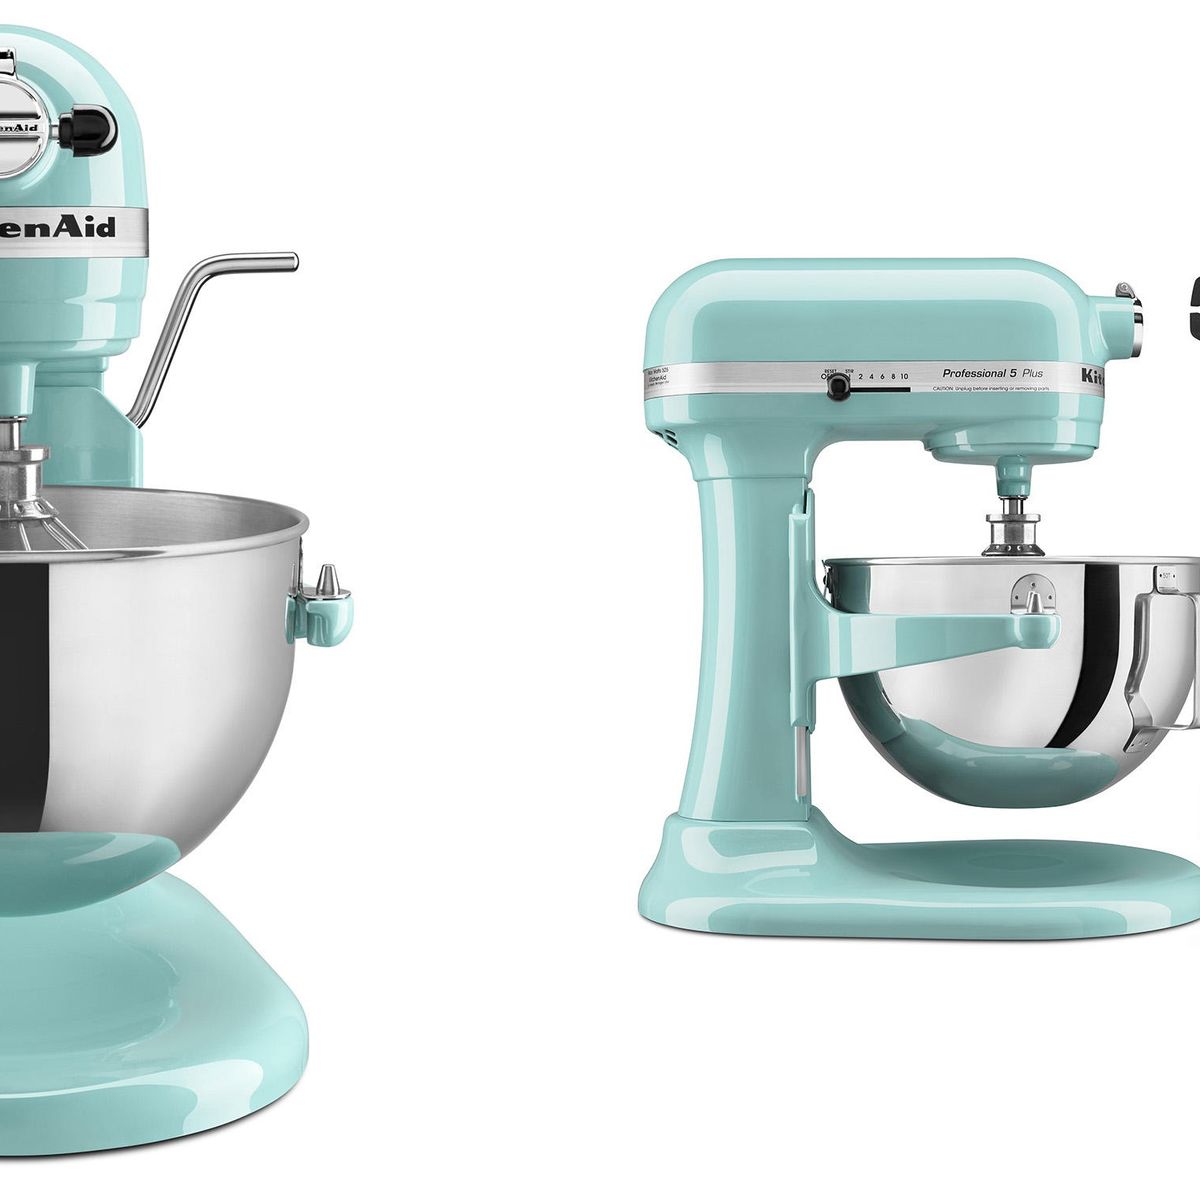 Sam's Club Is Selling A KitchenAid Baker's Bundle For $70 Off